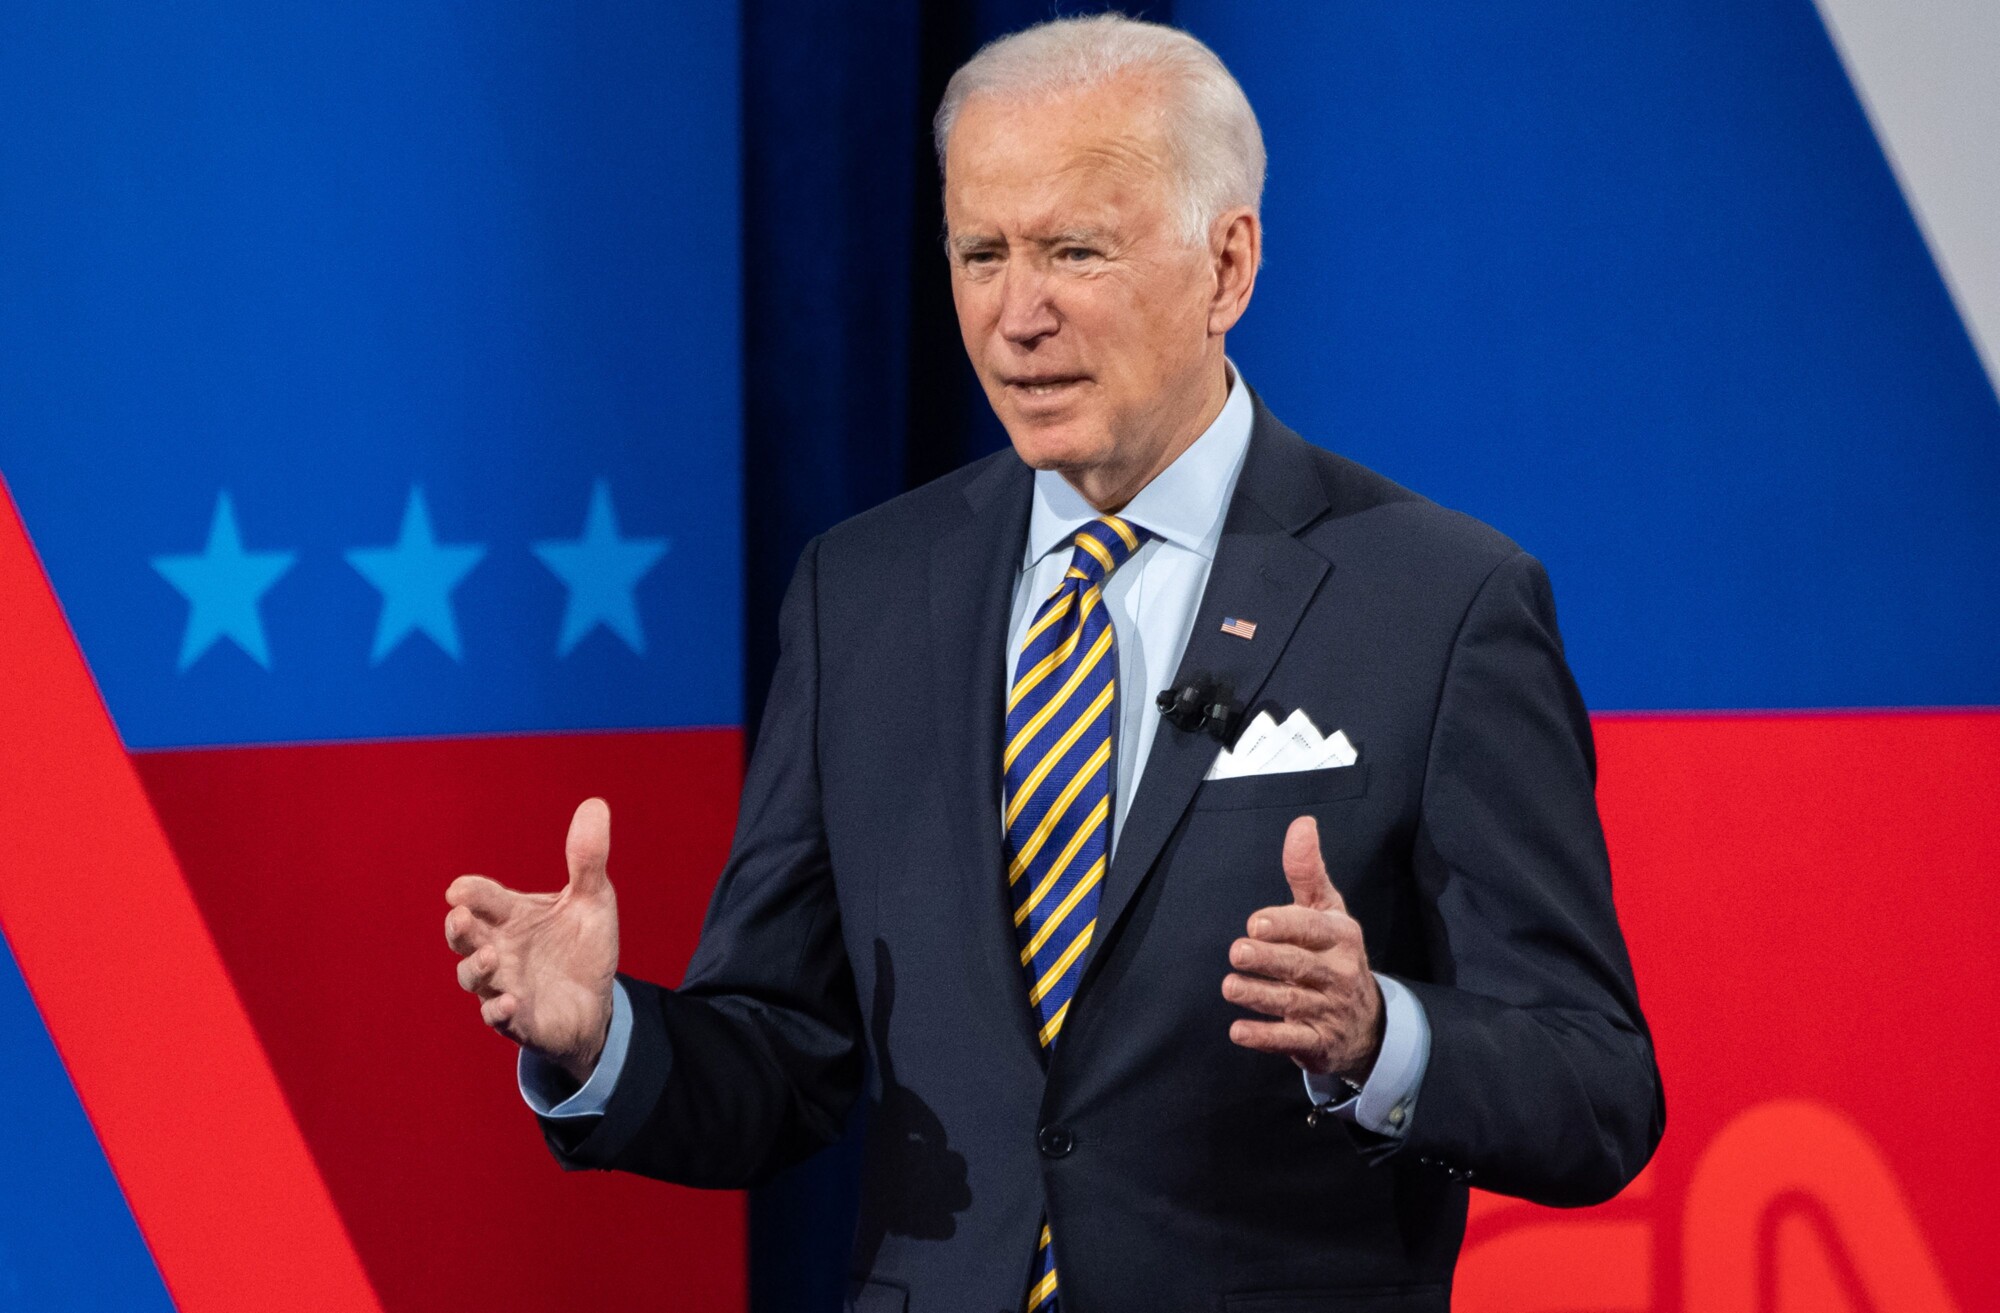 Biden Says Chinese Regime Will Face Repercussions for Its Rights Abuses